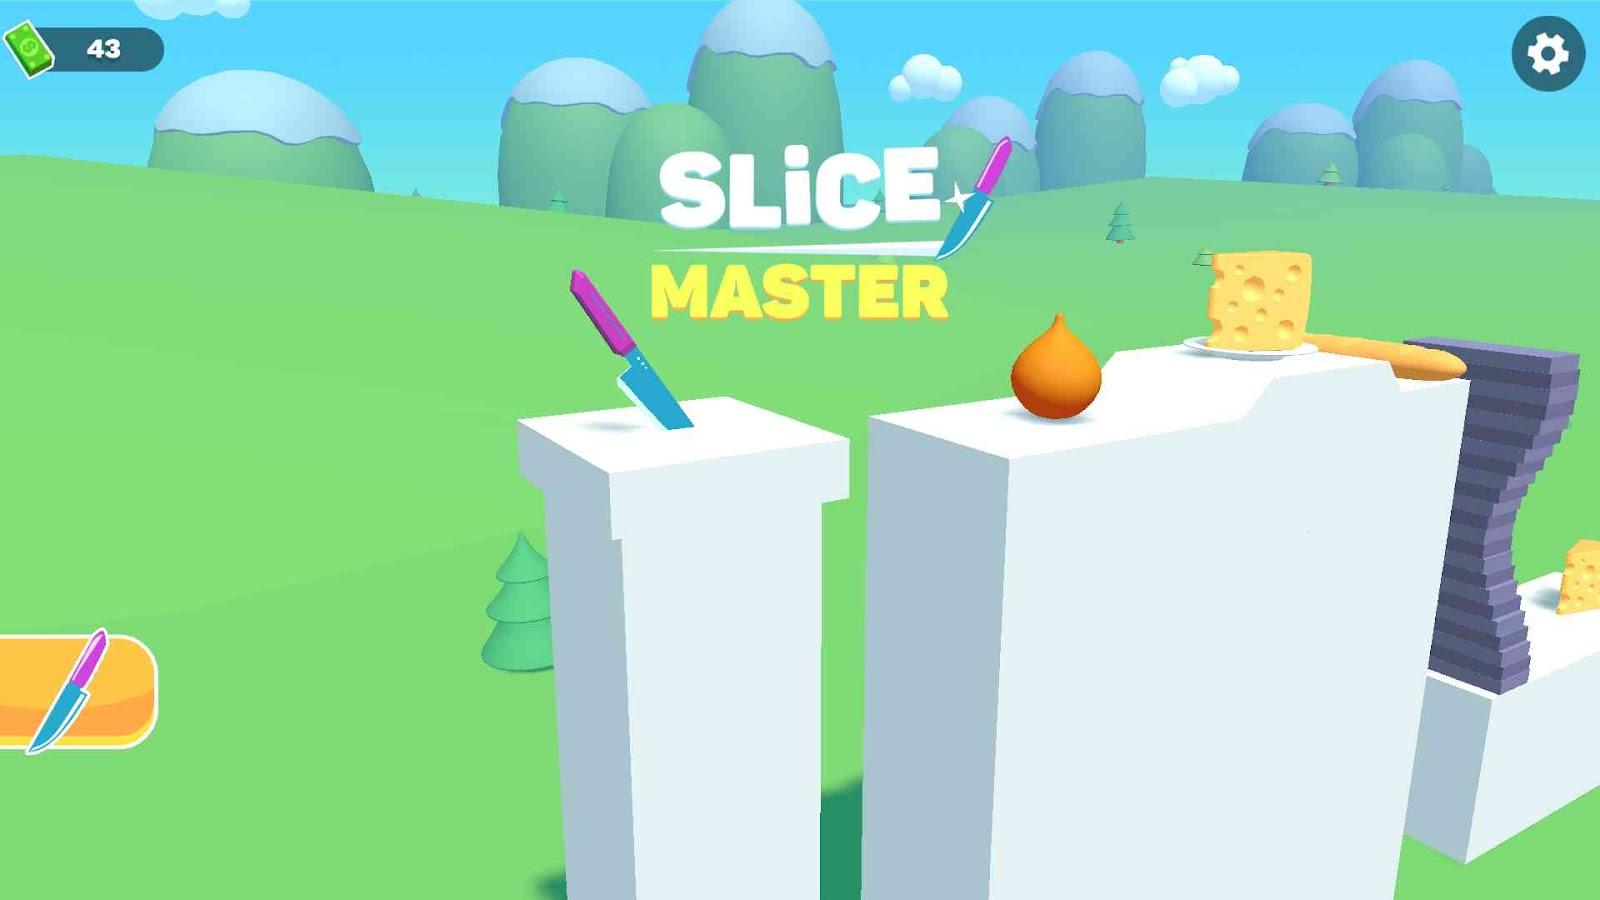 What is Slice Master